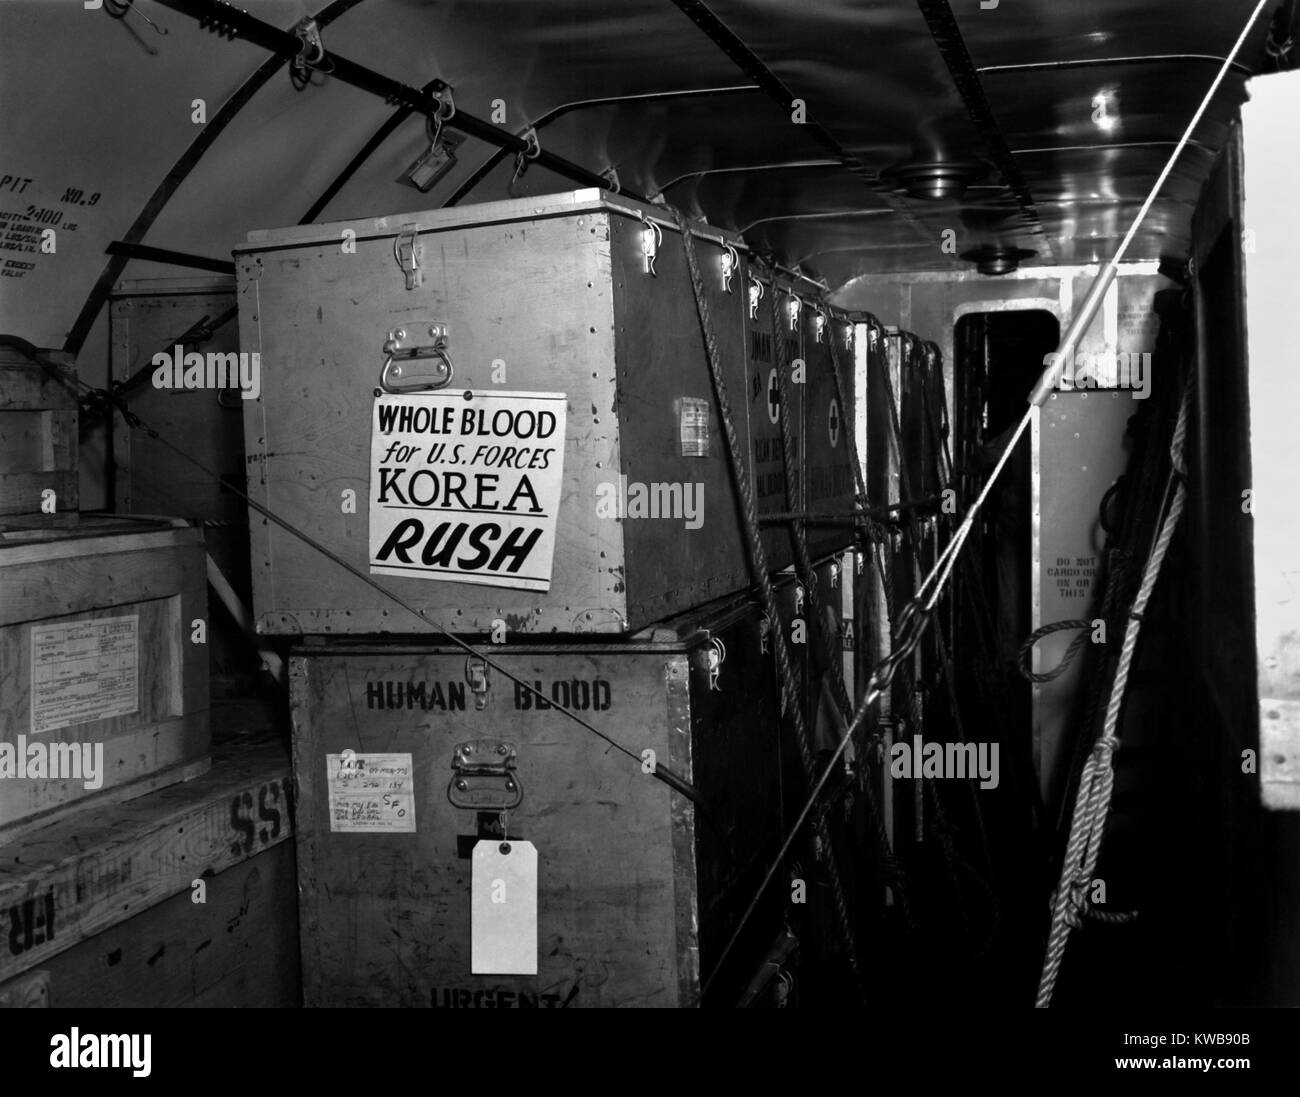 Air shipments of whole blood from American Red Cross for Korean War casualties. It will be stored in Yokohoma, for shipment to Korea as needed. Korean War, 1950-53. (BSLOC 2014 11 205) Stock Photo